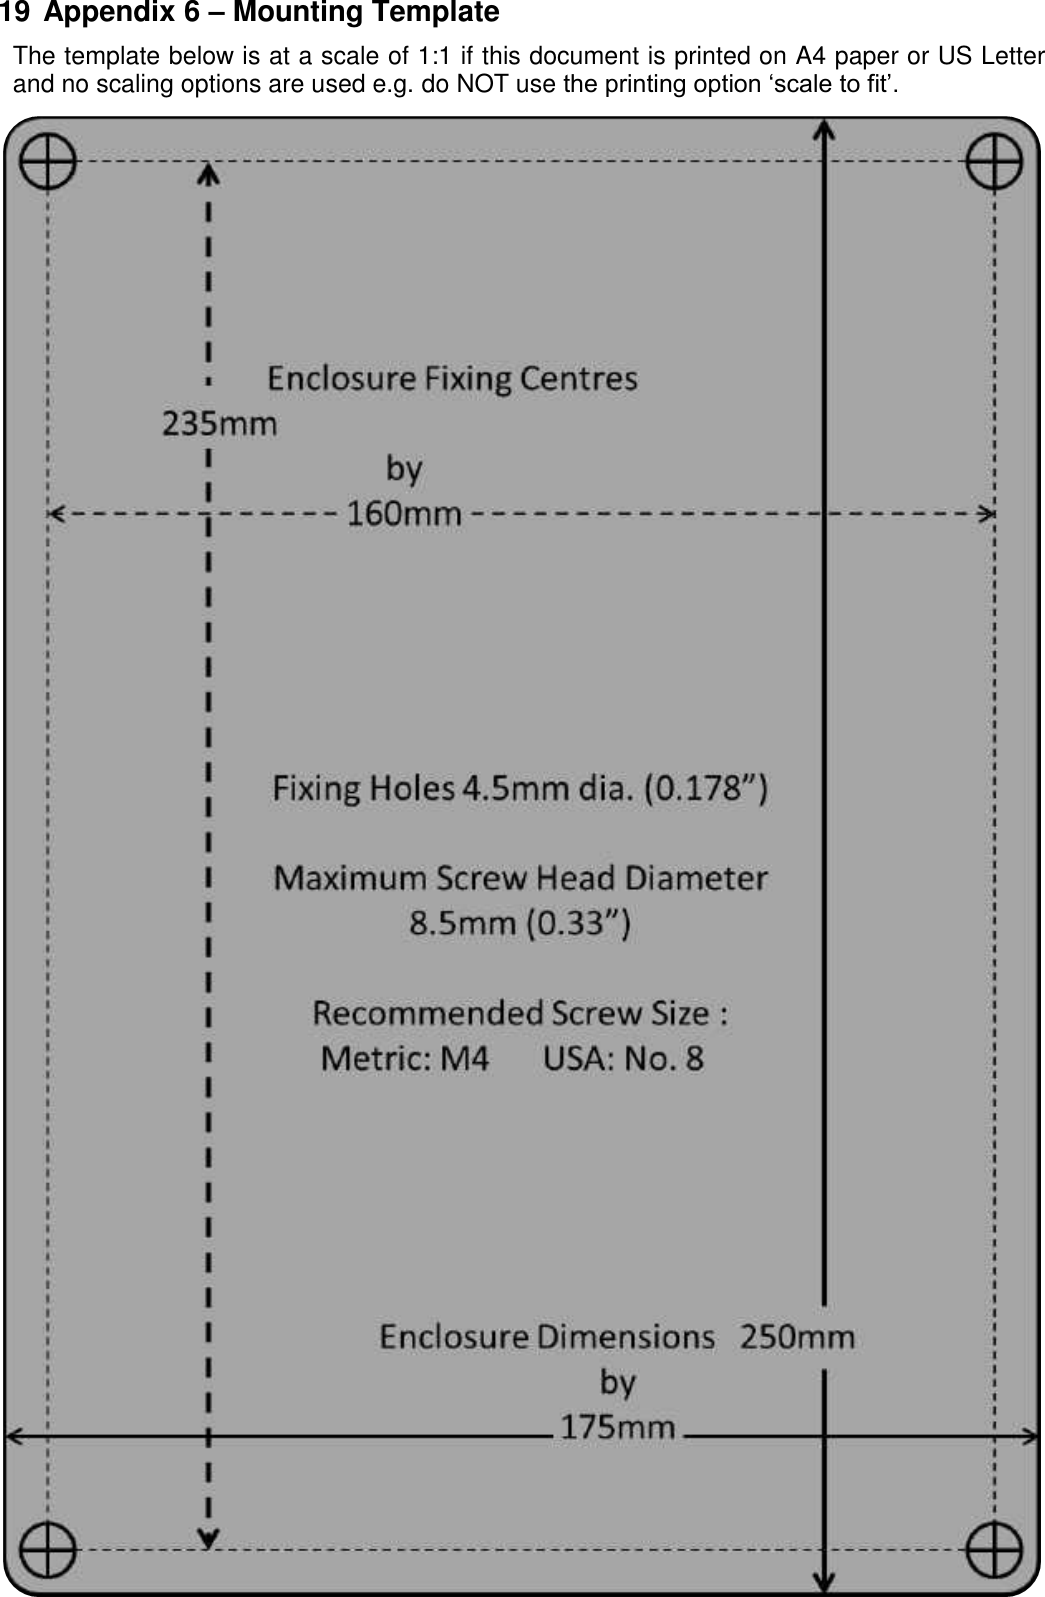     19 Appendix 6 – Mounting Template The template below is at a scale of 1:1 if this document is printed on A4 paper or US Letter and no scaling options are used e.g. do NOT use the printing option ‘scale to fit’.     